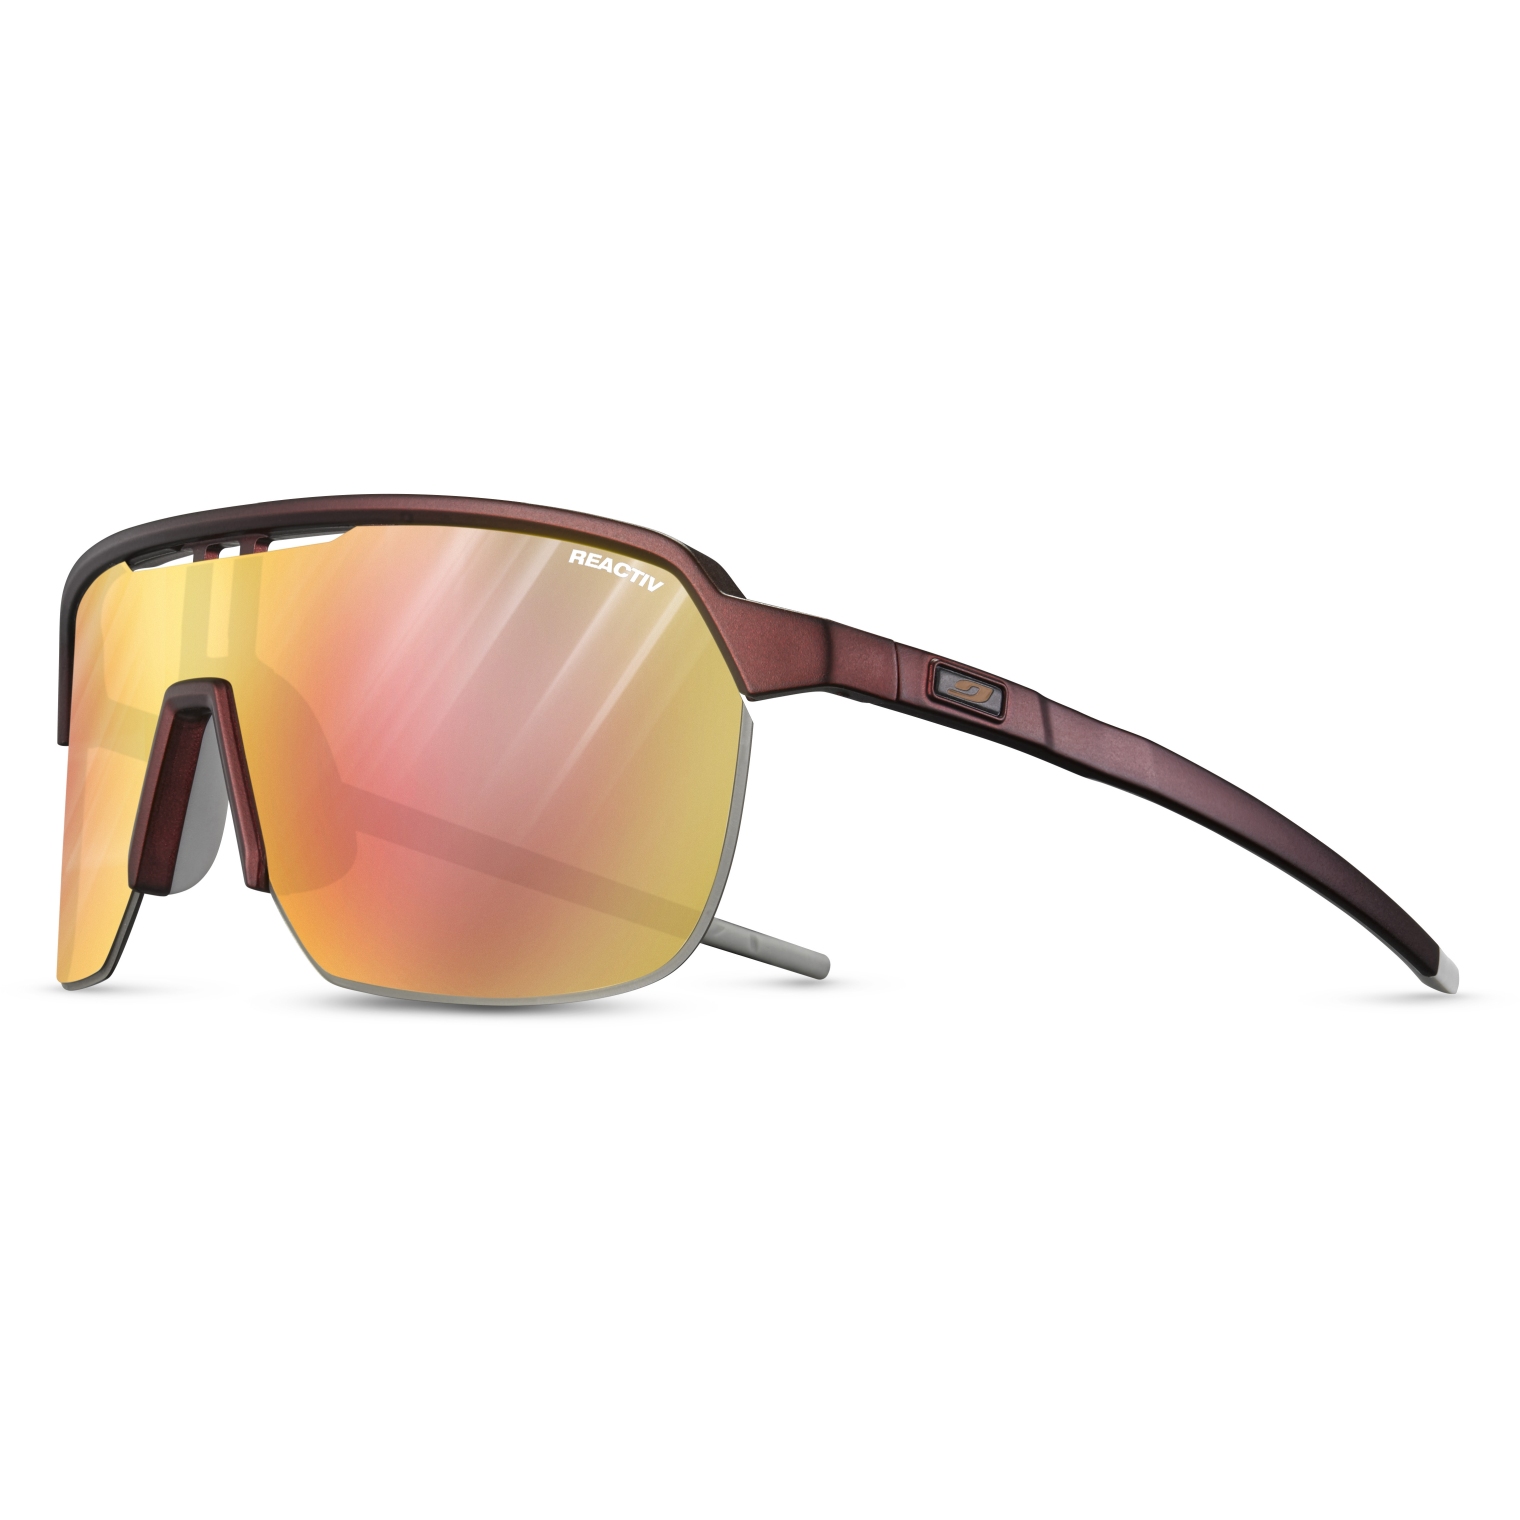 Picture of Julbo Frequency Reactiv Sunglasses - Burgundy Light Grey / Pink Gold 1-3 Light Amplifier